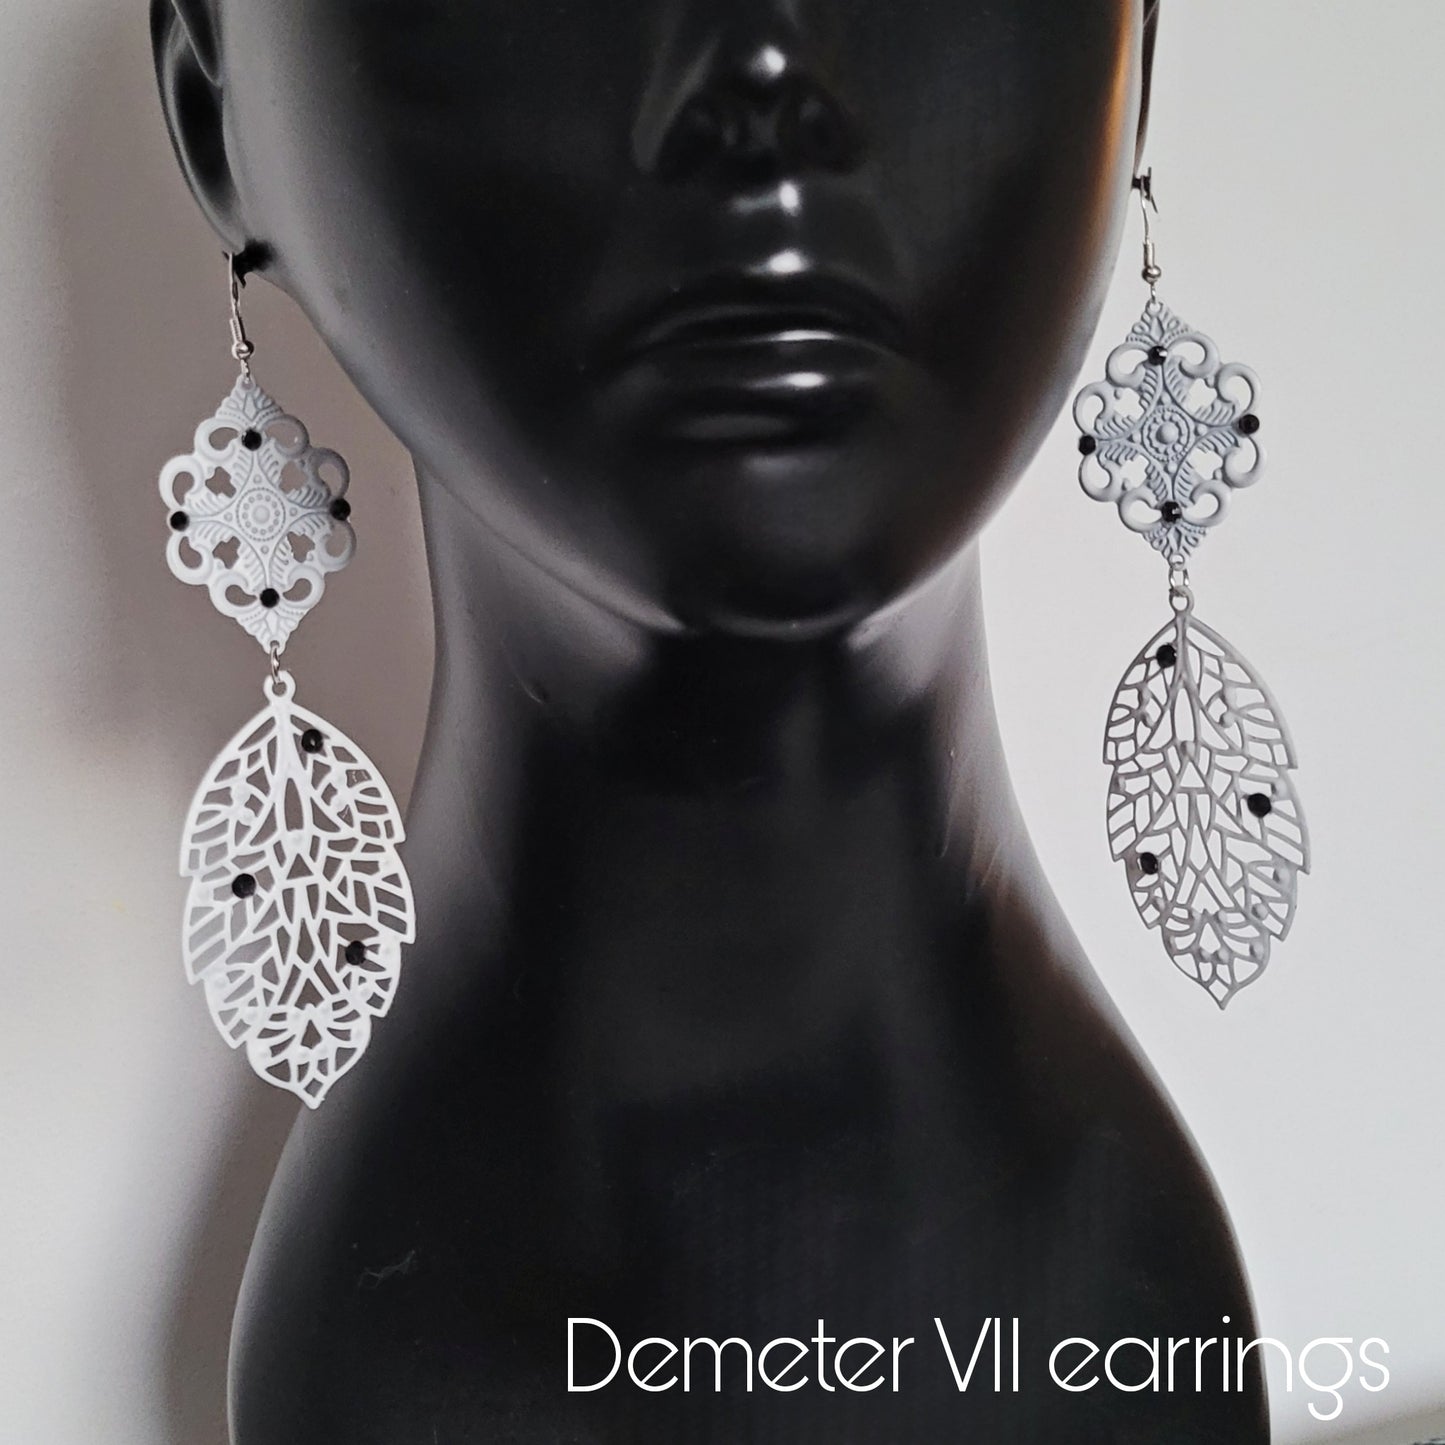 Deusa ex Machina collection: The Demeter earrings